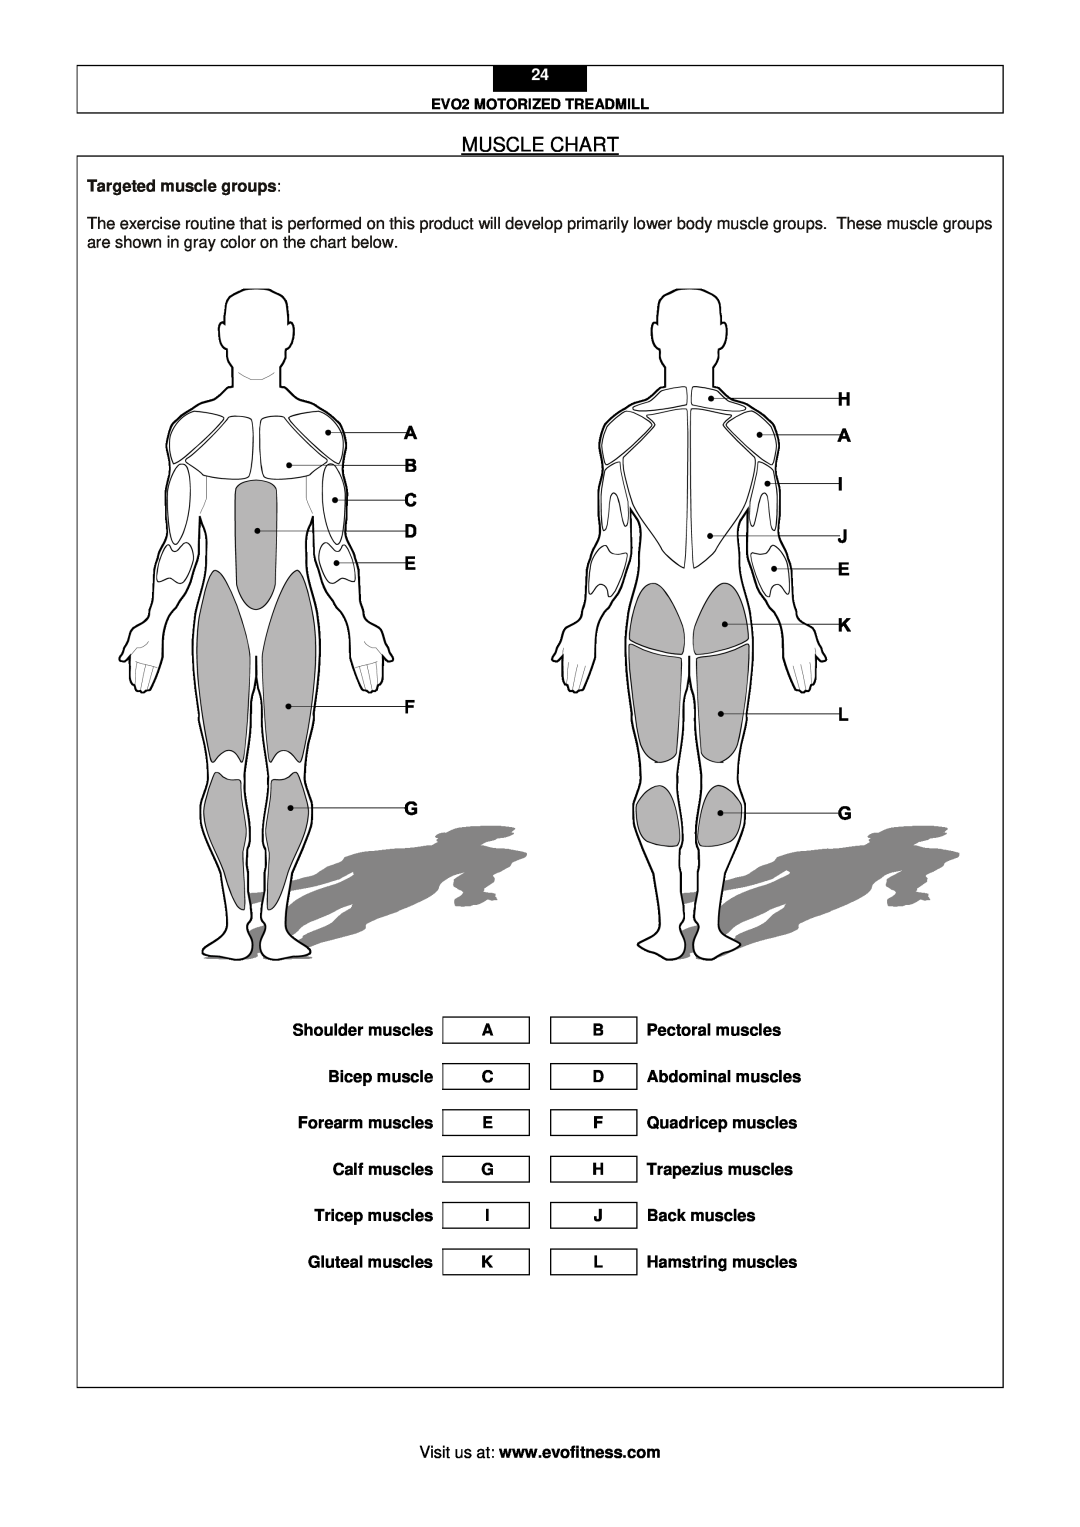 Evo Fitness EVO2 user manual Muscle Chart, Targeted muscle groups 